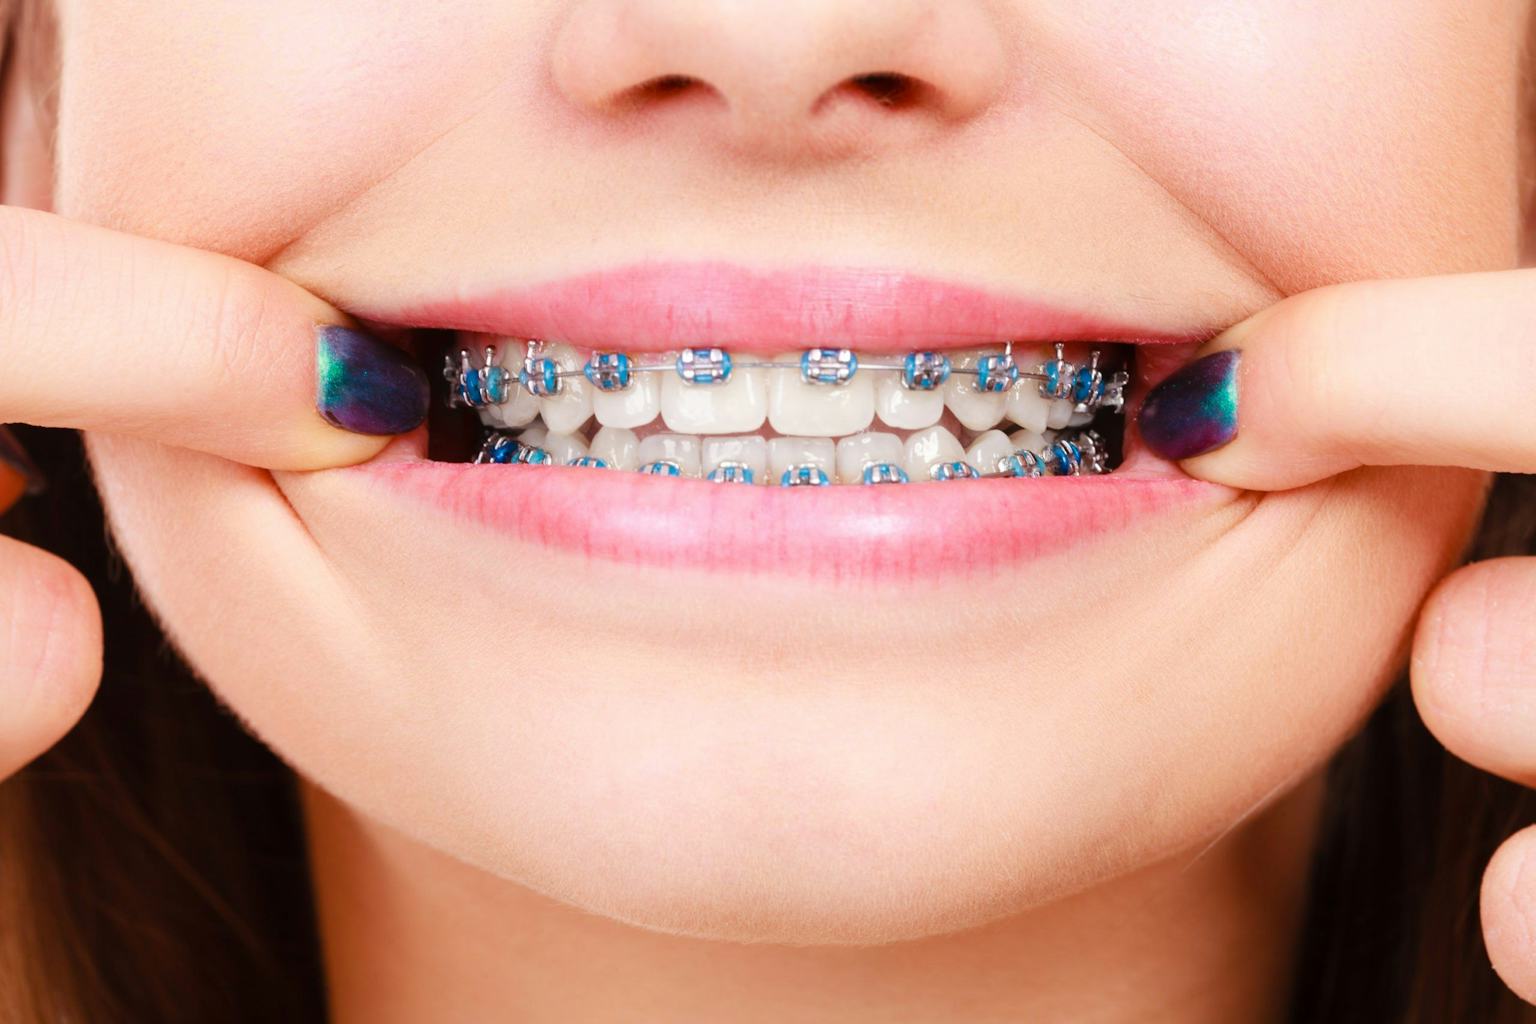 A patient reveals her colourful fixed braces